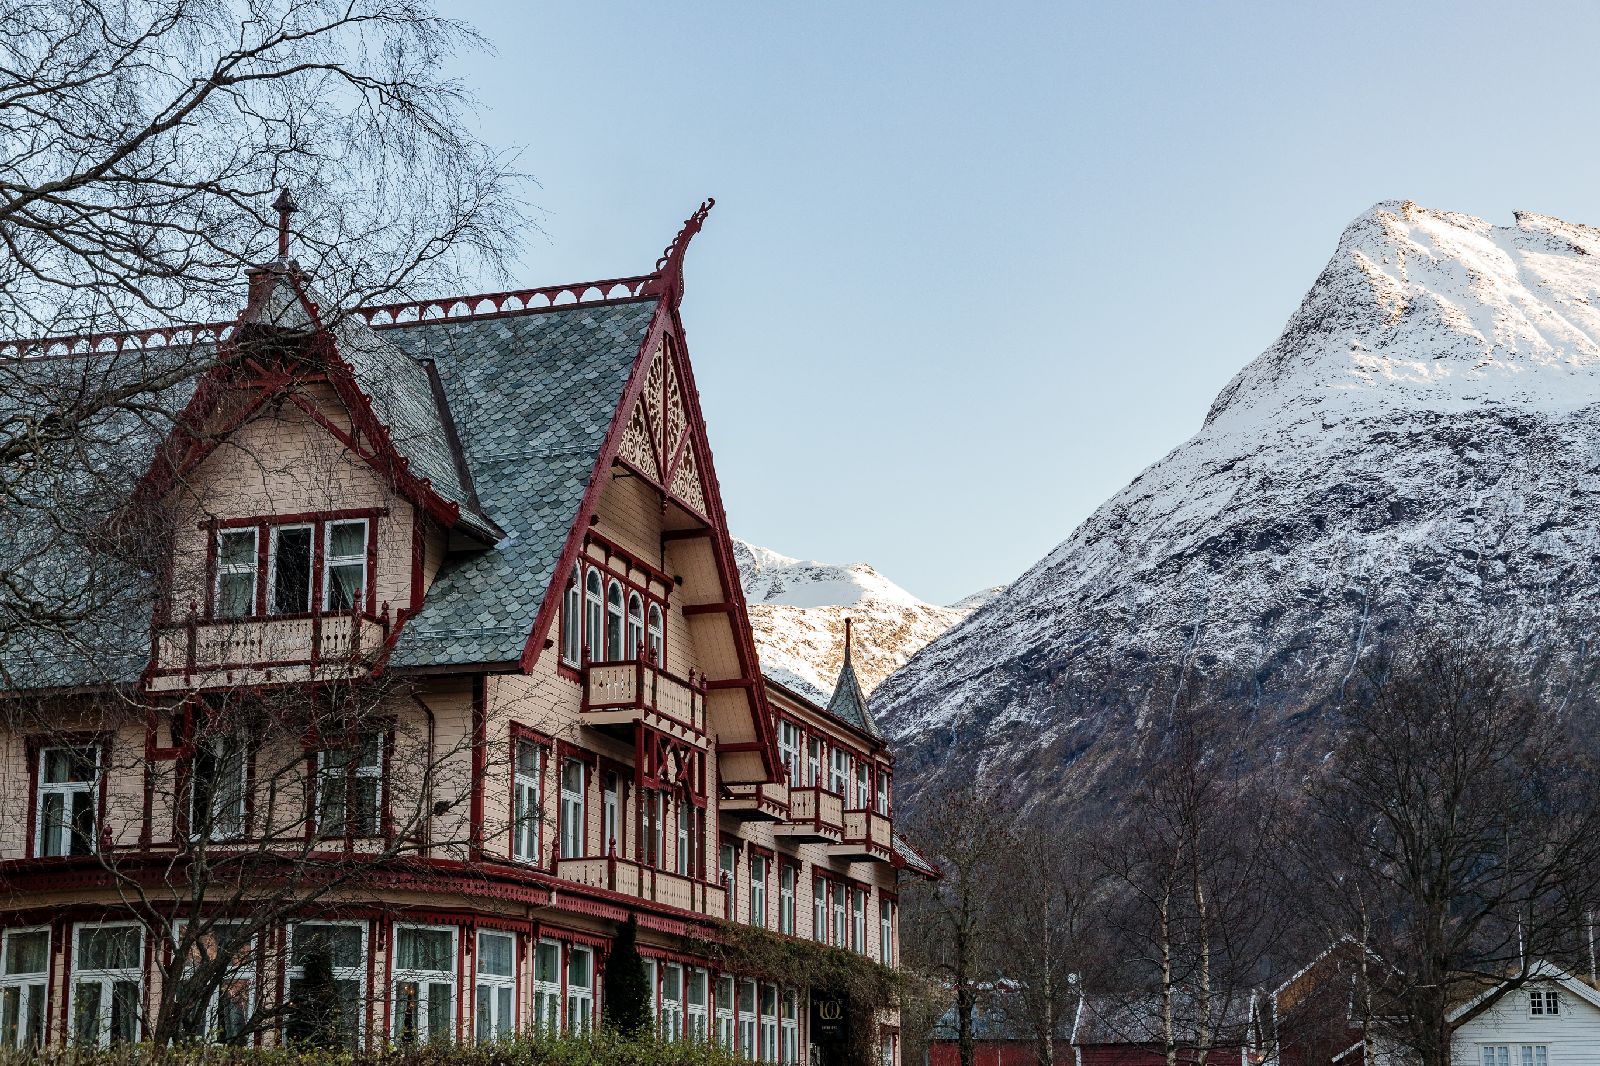 The Union Oye hotel in Norway with snowcapped mountain backdrop